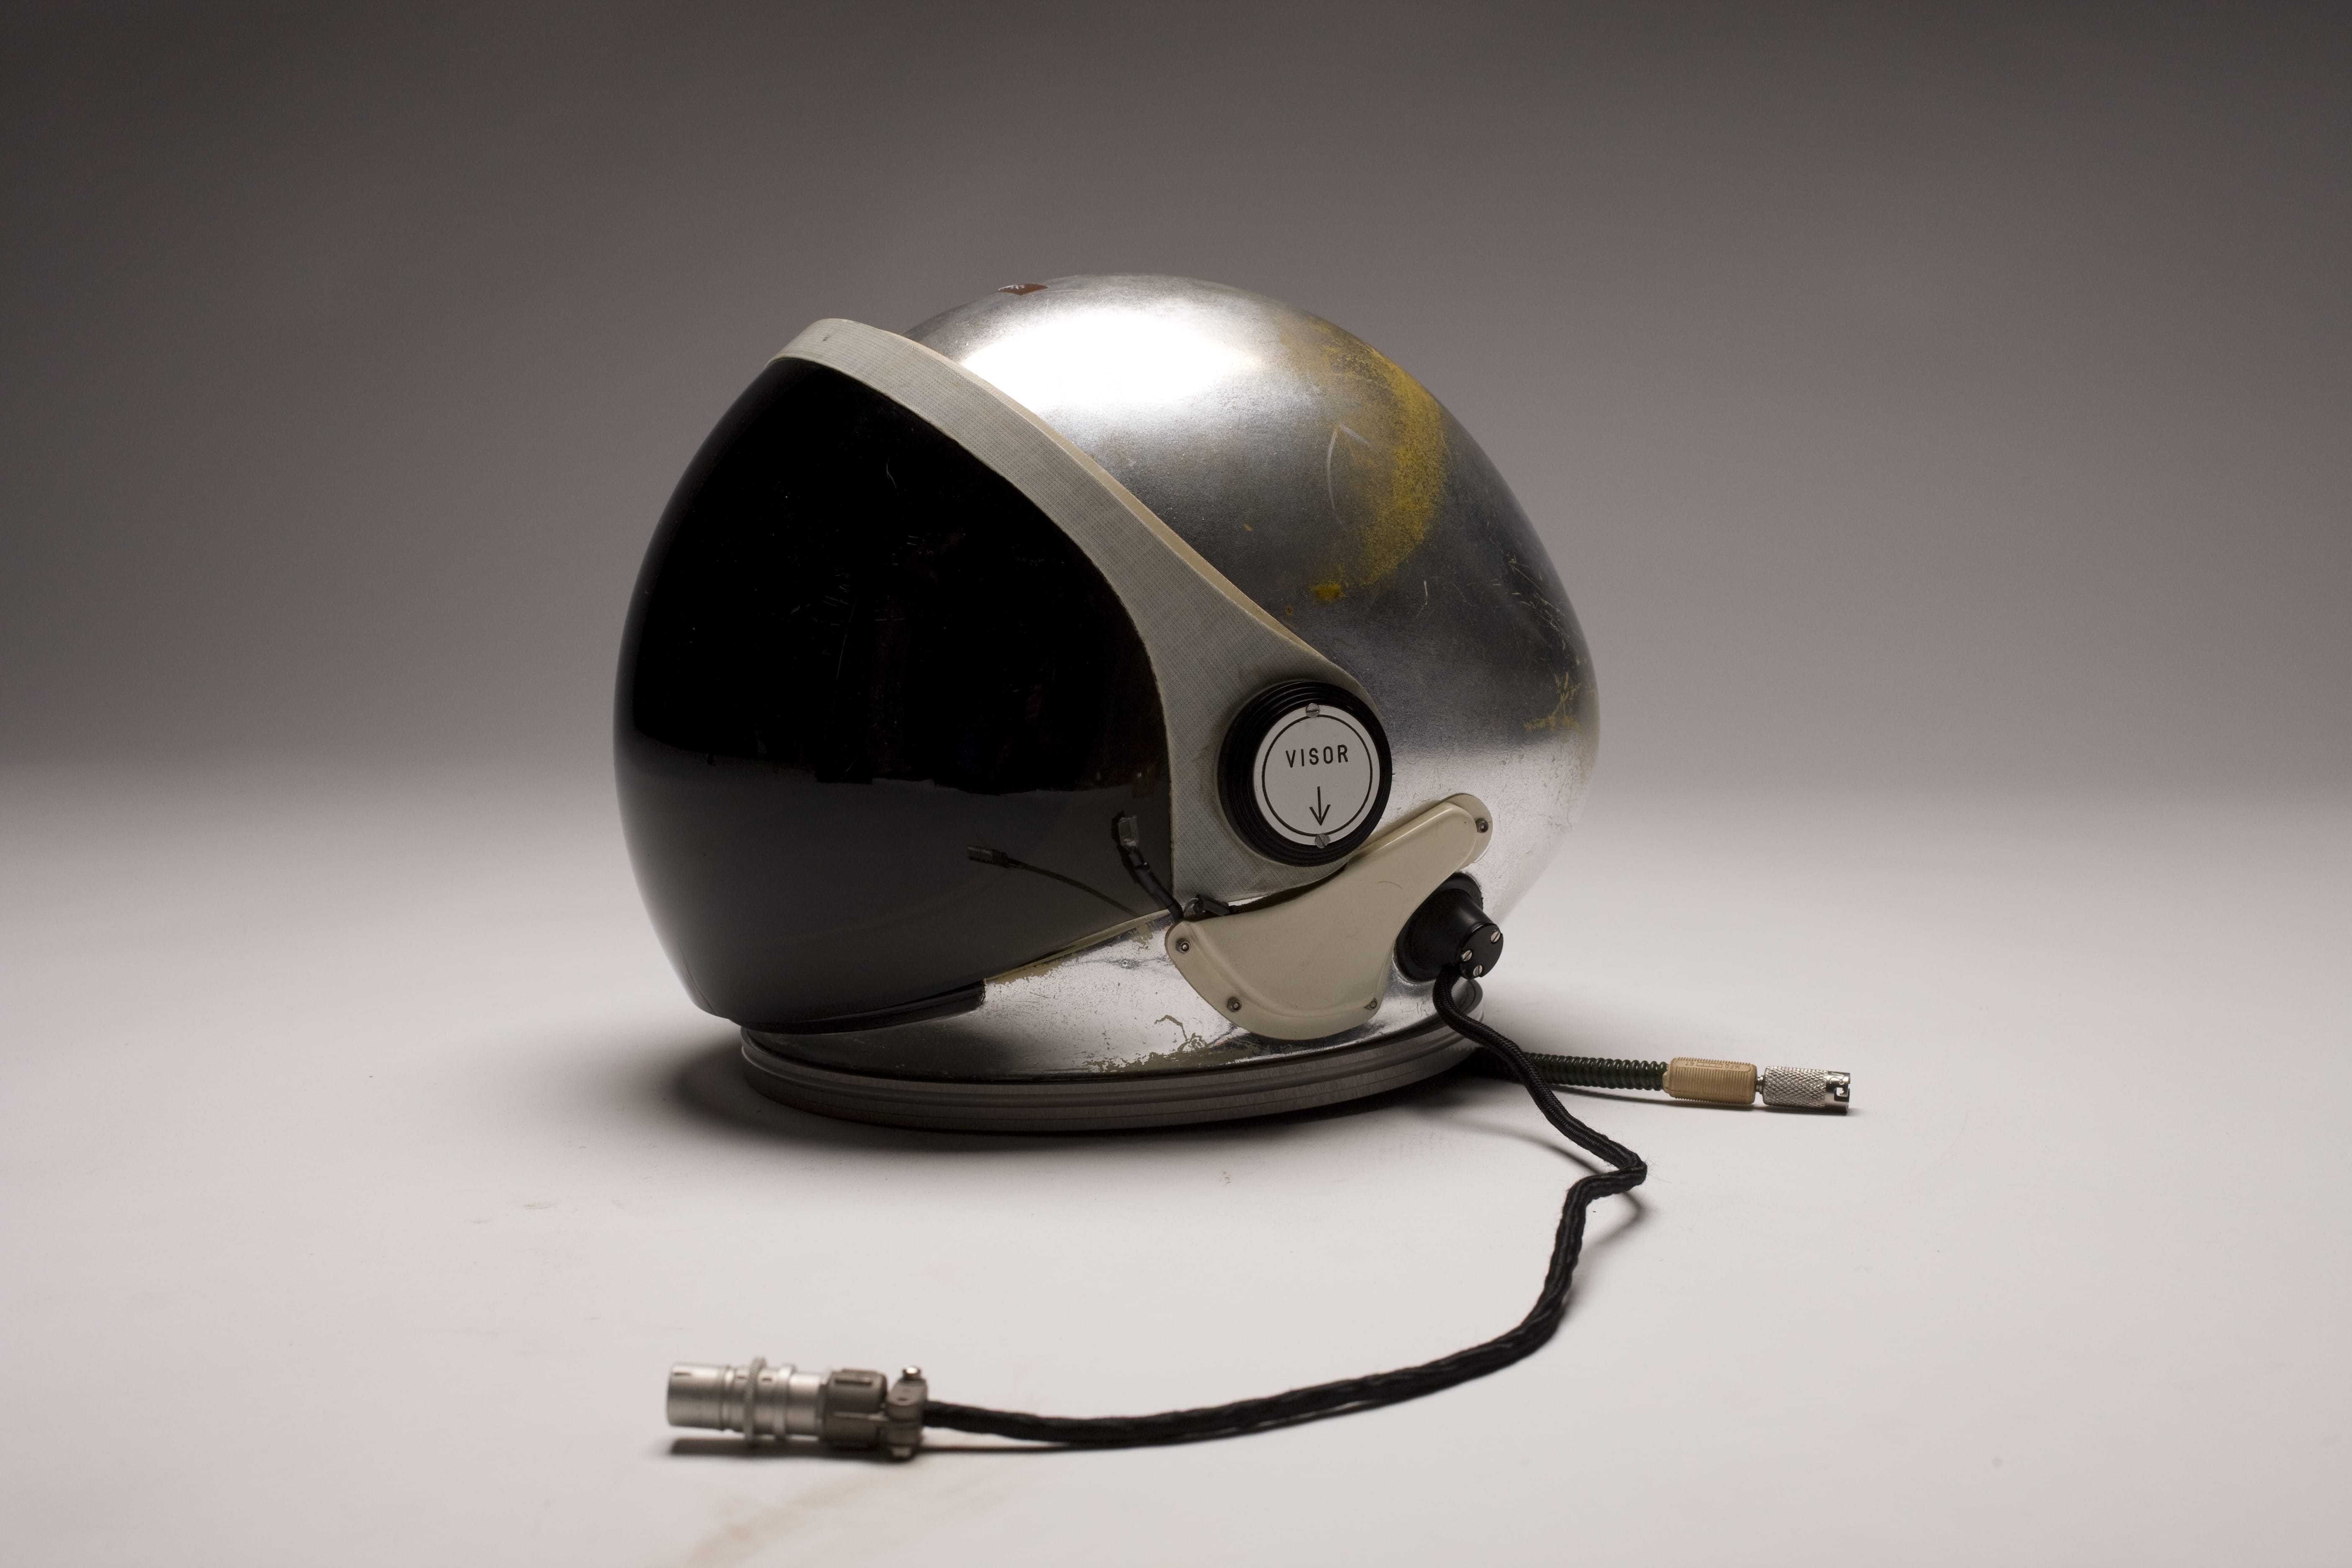 A silver A-12 pilot's helmet with a large visor and cords to connect to the suit